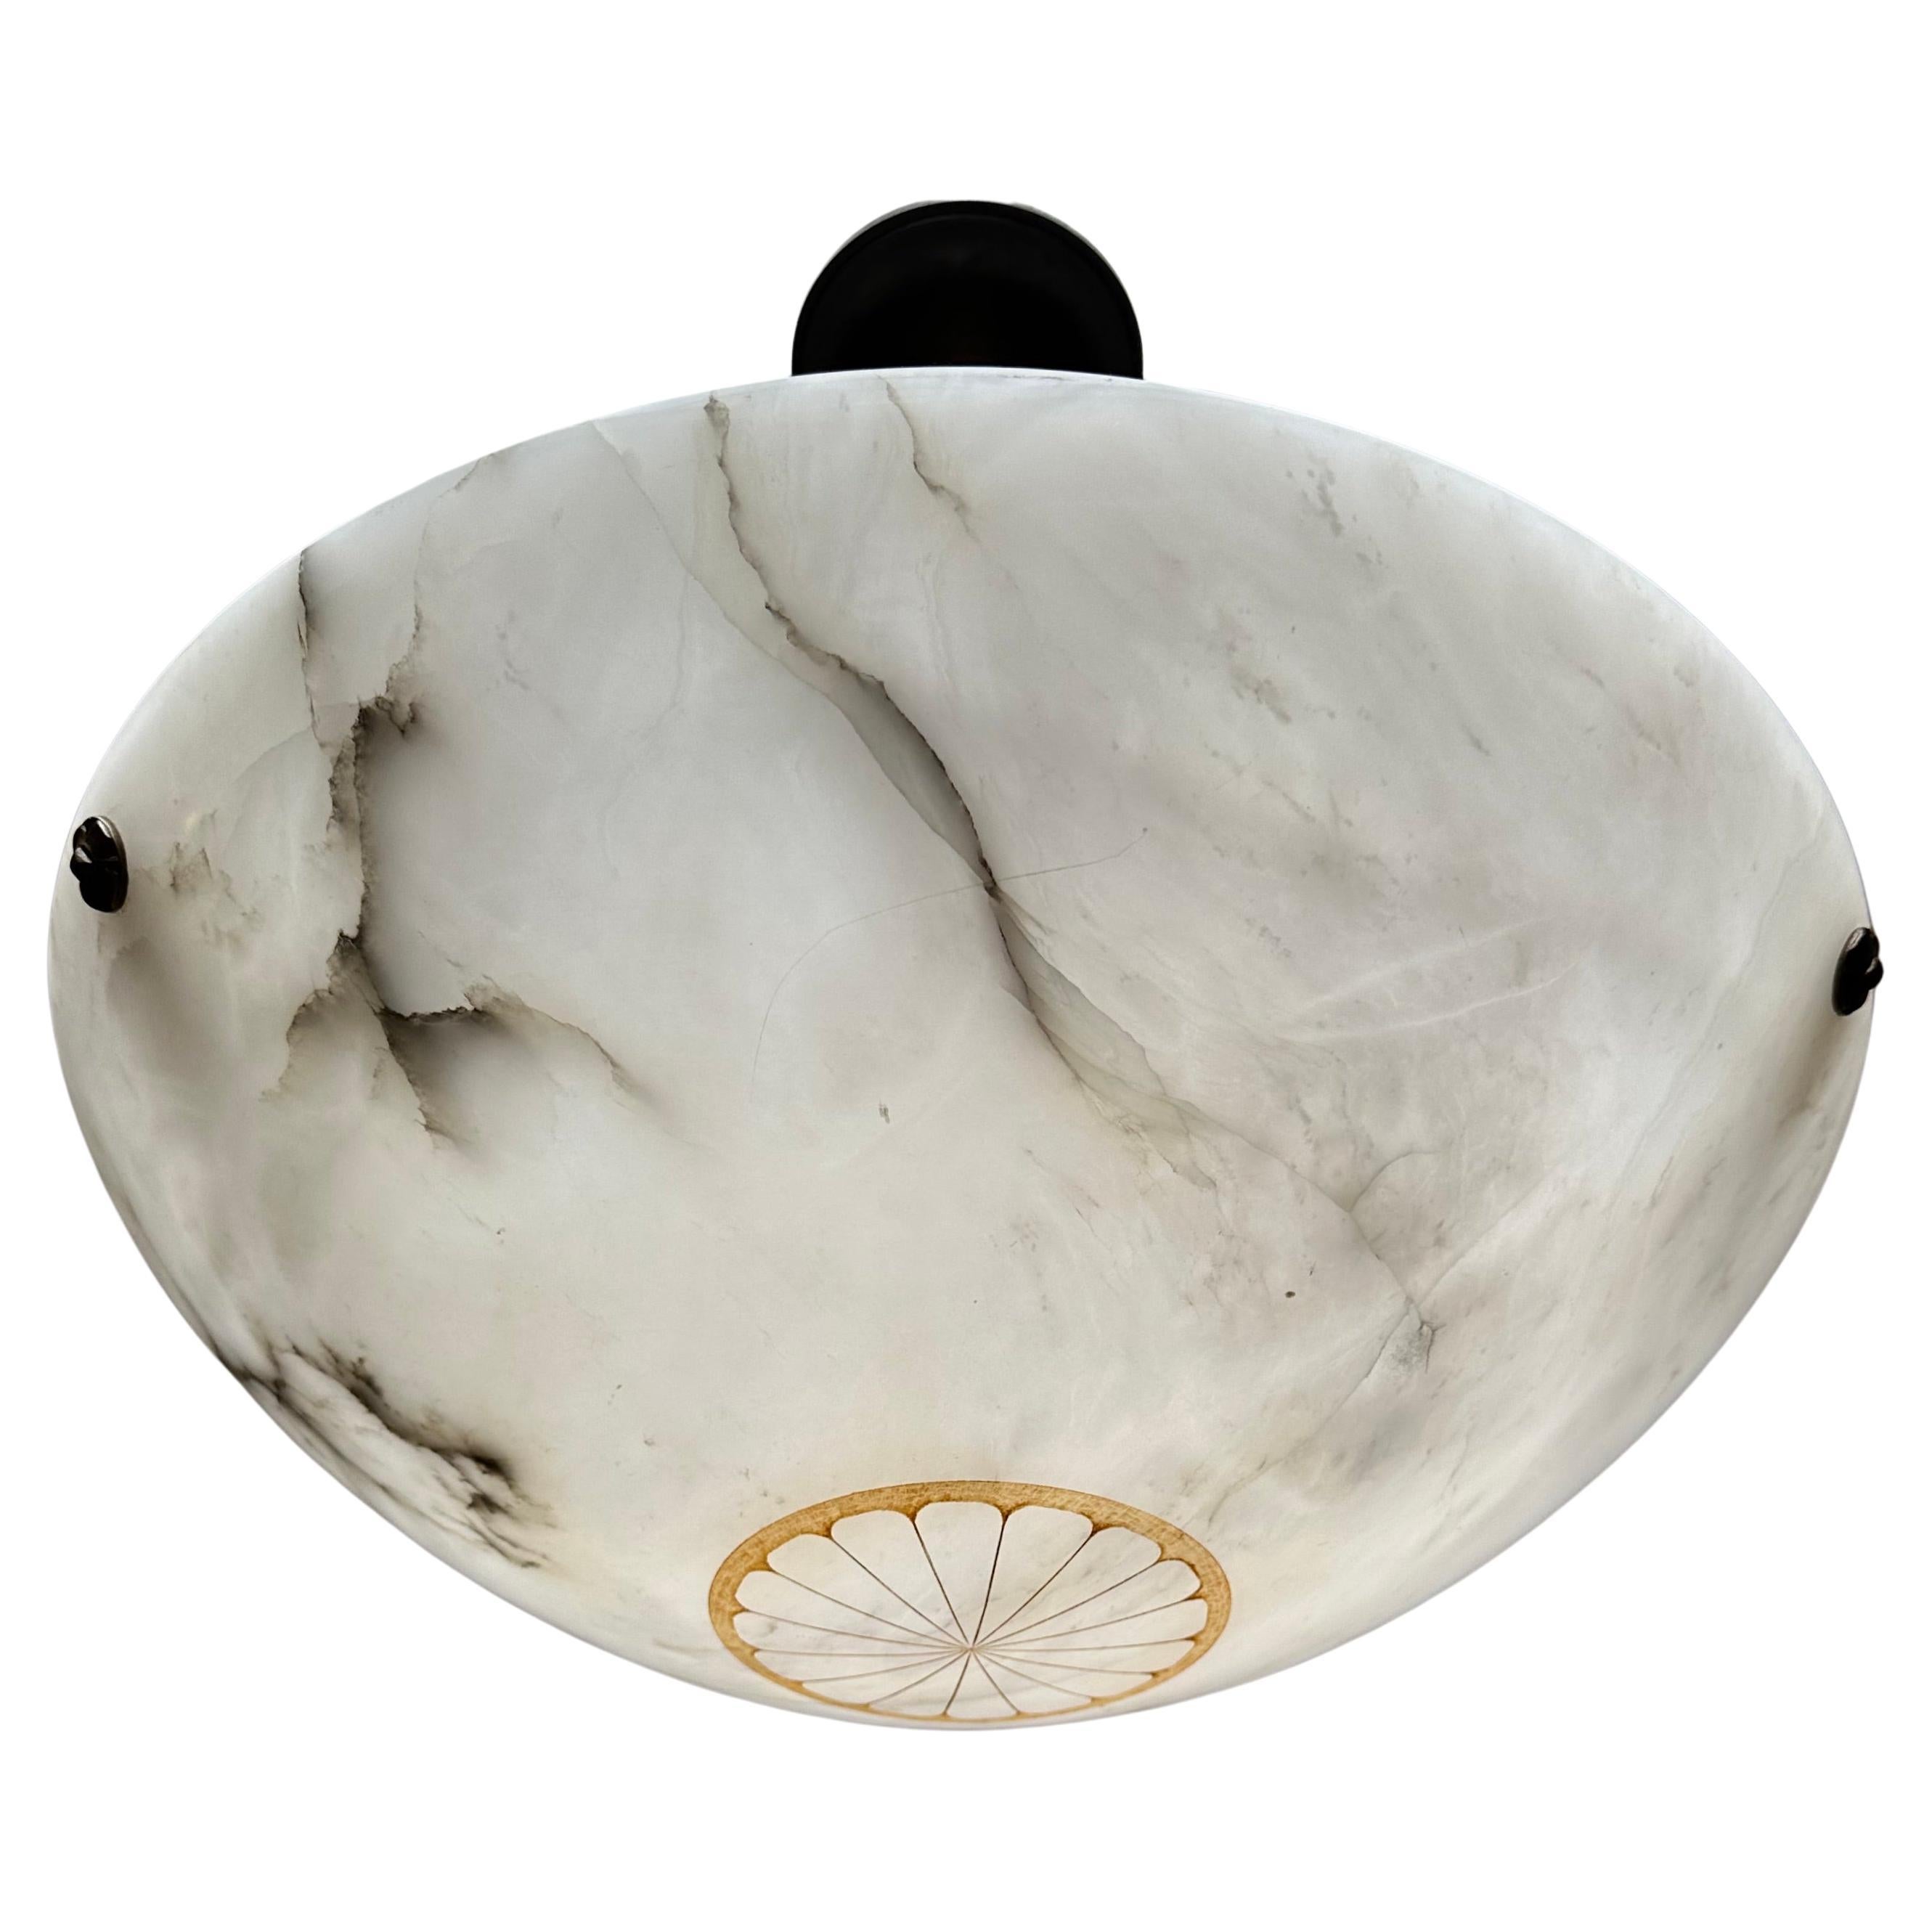 Large size (20.7 inches) and timeless, hand carved, antique alabaster pendant light.

Thanks to its 'calm' and timeless Art Deco design this alabaster chandelier will look great in all kinds of interiors. It is in good condition and the beautifully